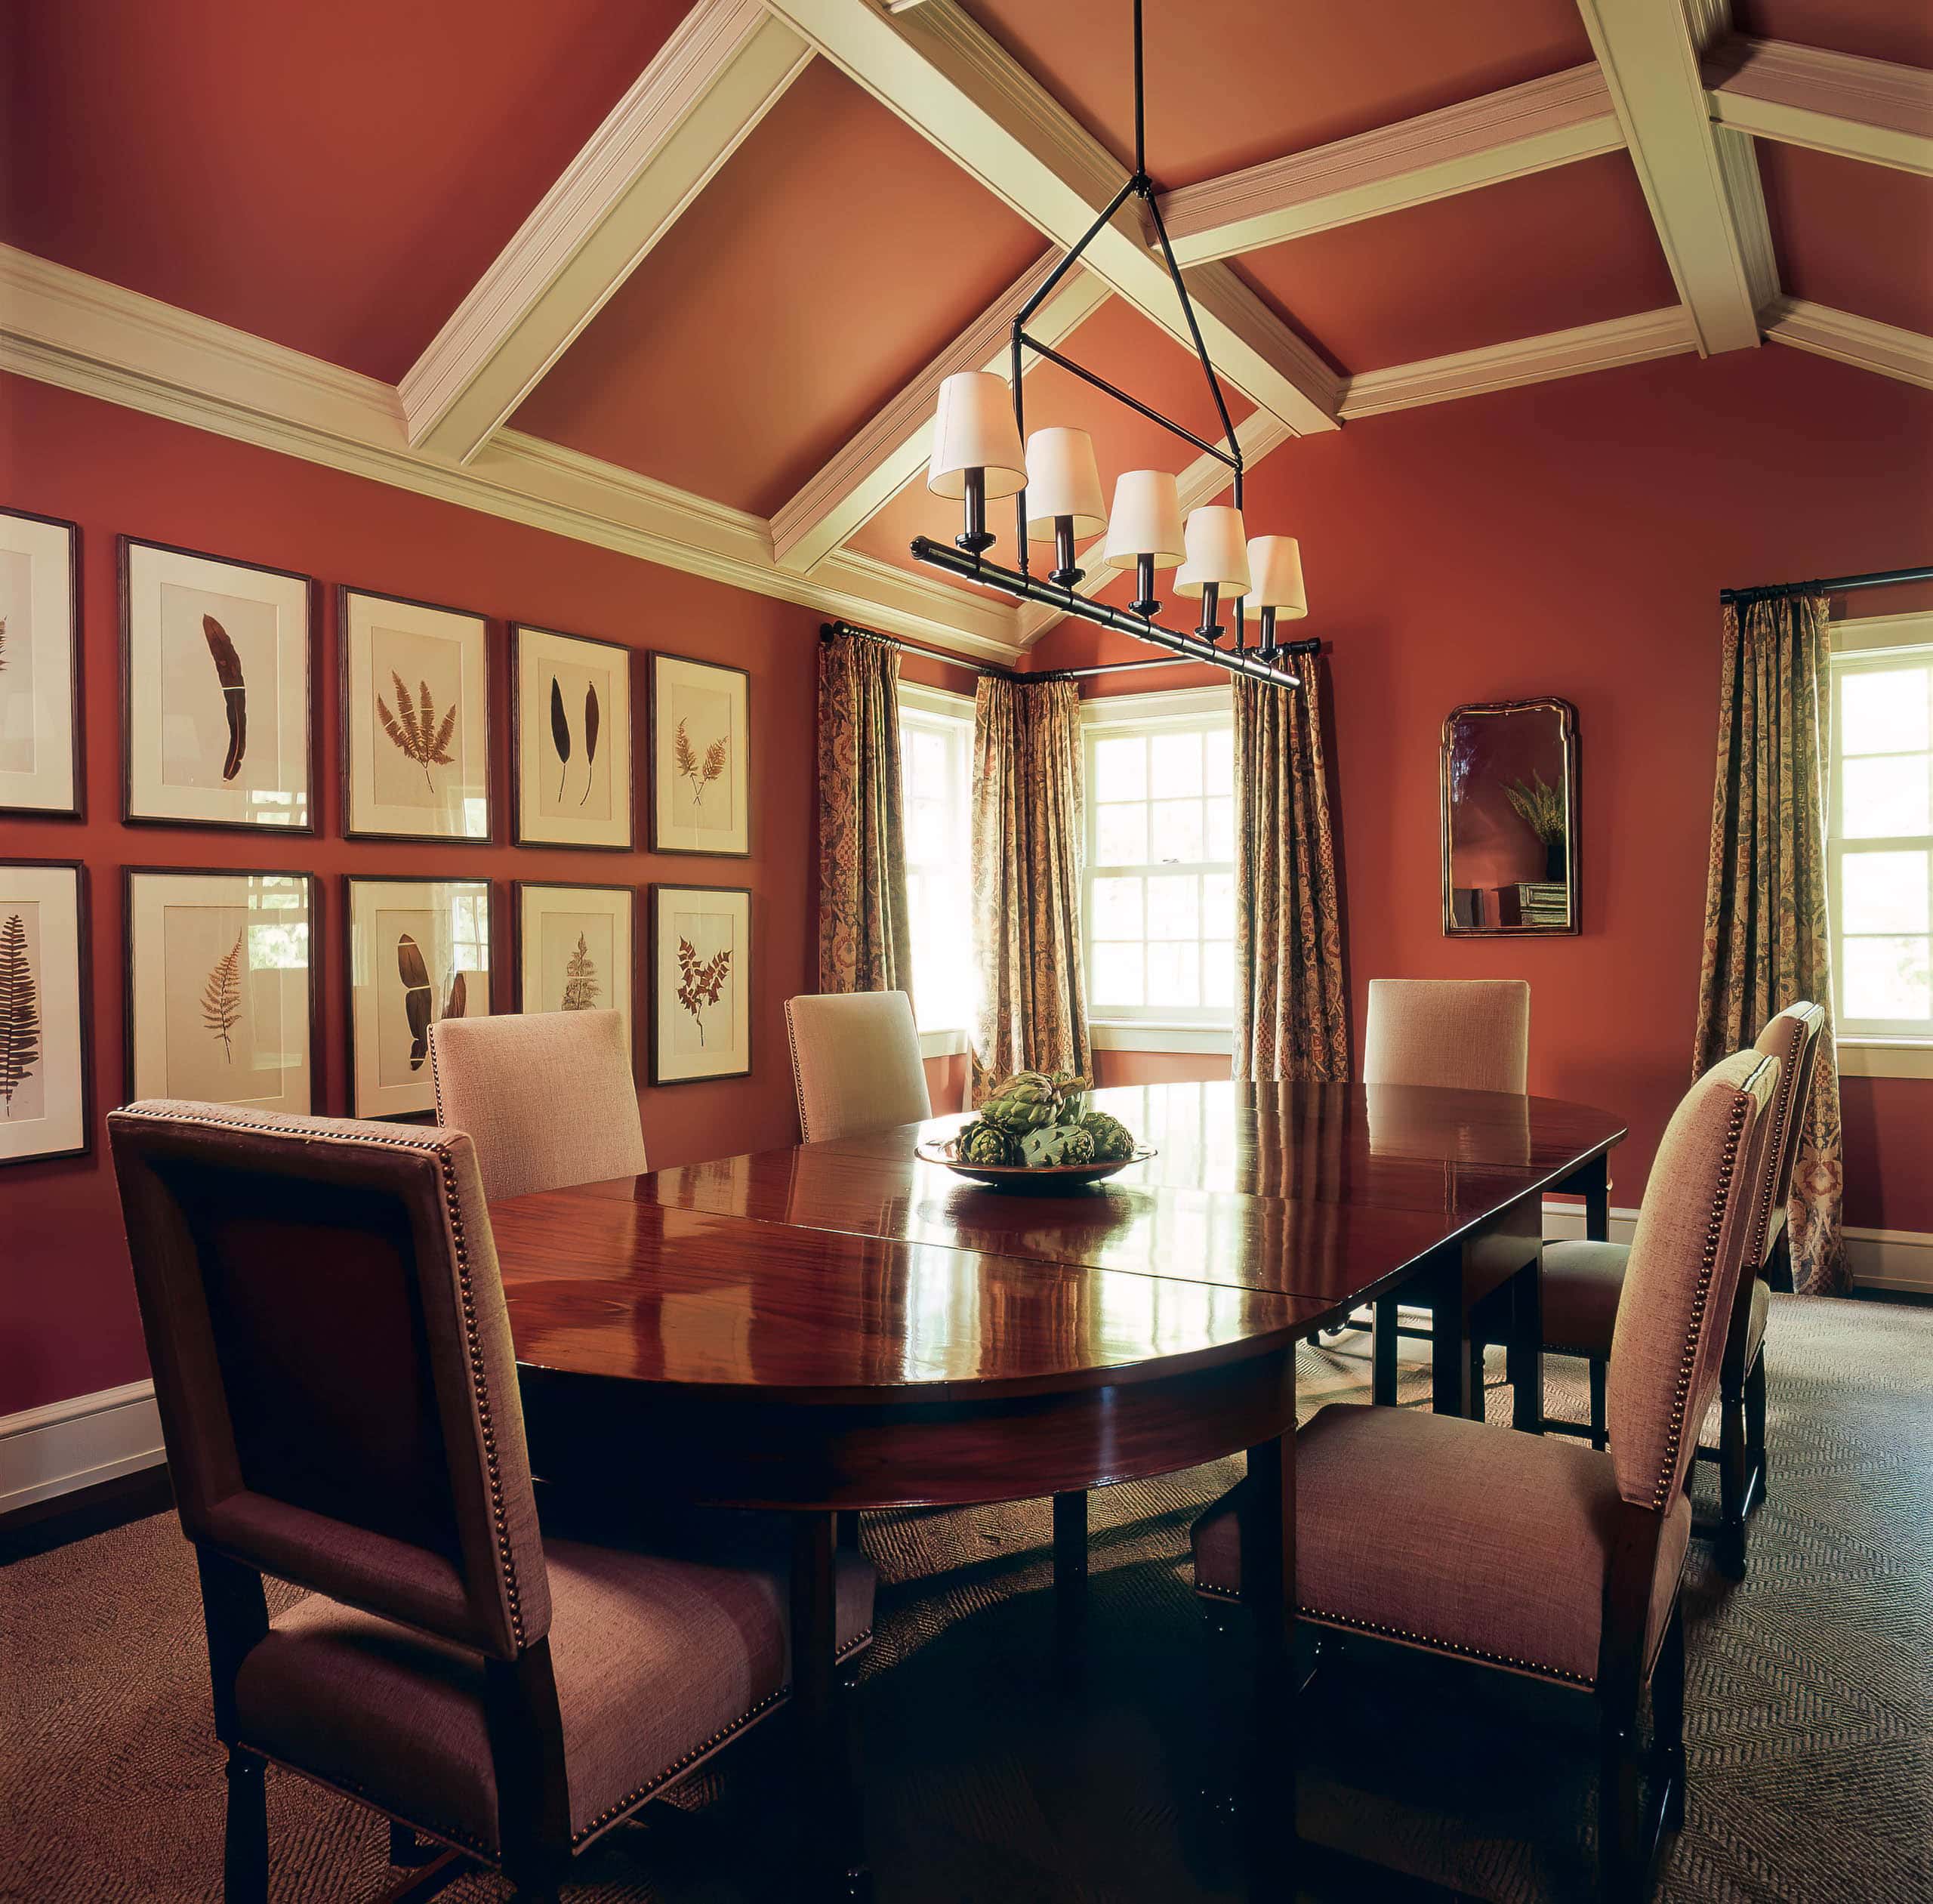 The walls and inset panels of the arched and coffered ceiling in this dining room were painted in Farrow & Ball's Loggia No. 232, setting the tone for lively conversation. In contrast to the rich russet-red, a series of framed botanicals reference the gardens on the property beyond the glass.